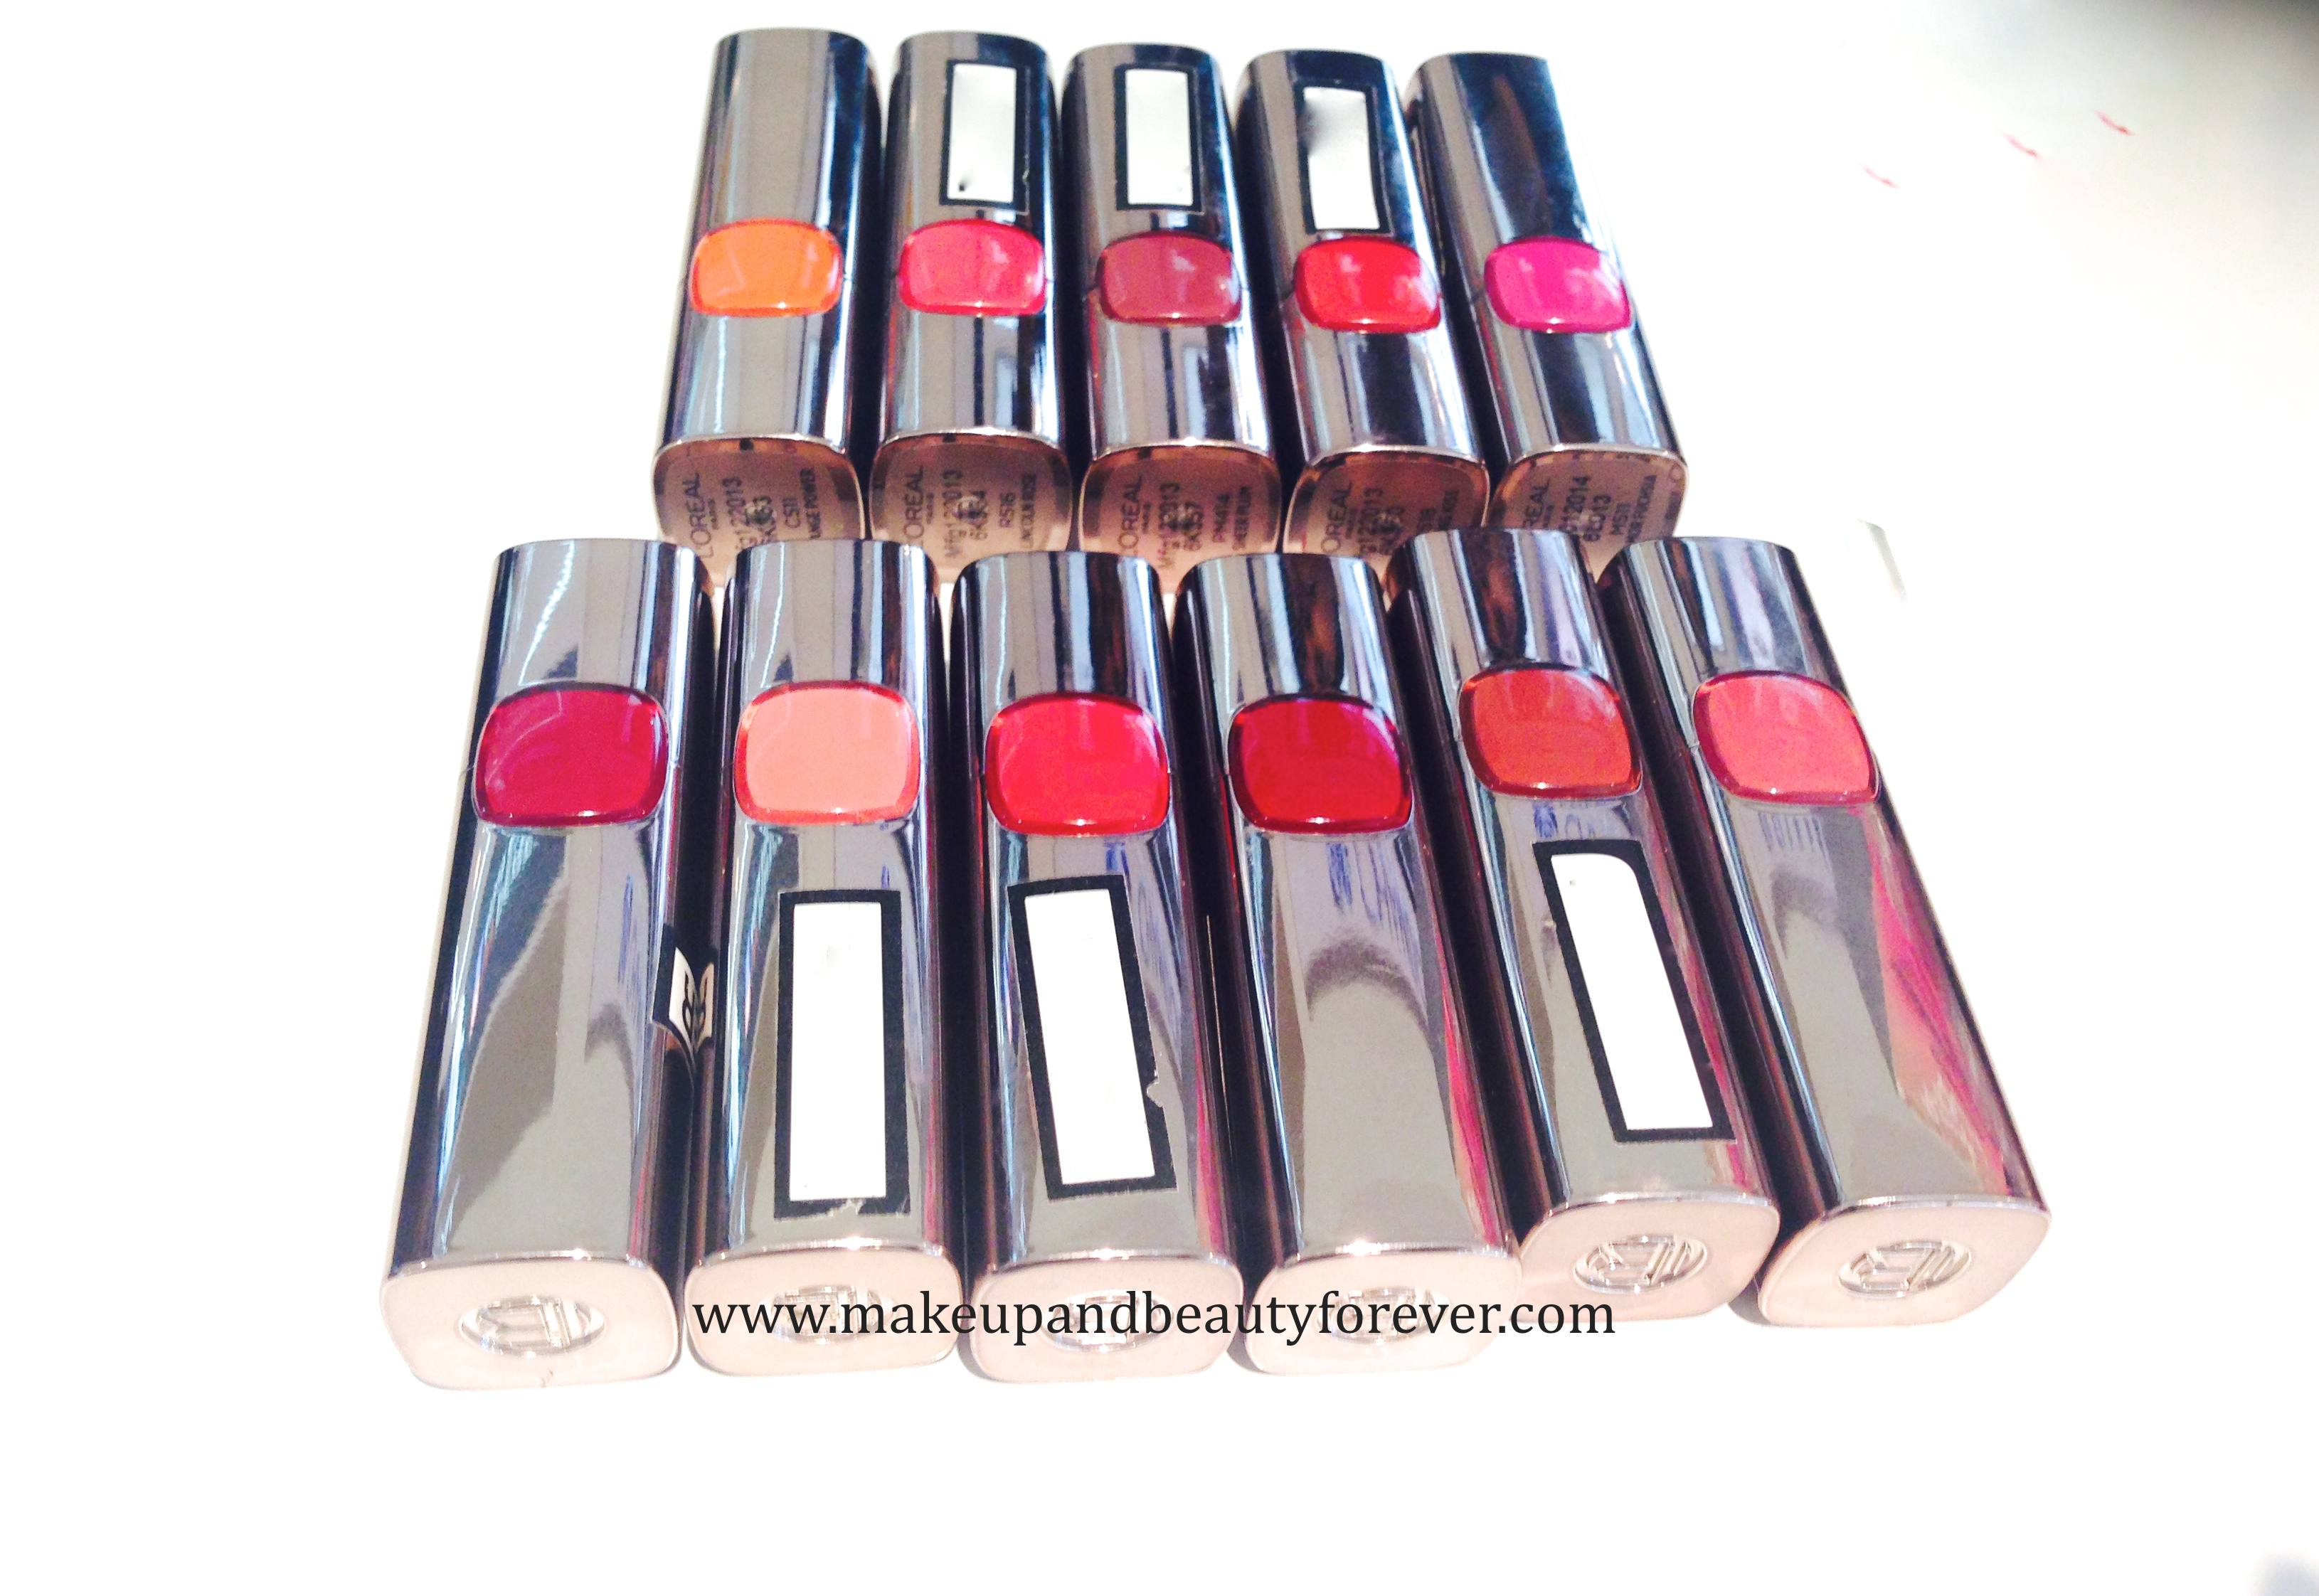 huisvrouw gemeenschap vermoeidheid All LOreal Paris Color Riche Moist Matte Lipstick Review, Shades, Swatches,  Price and Details